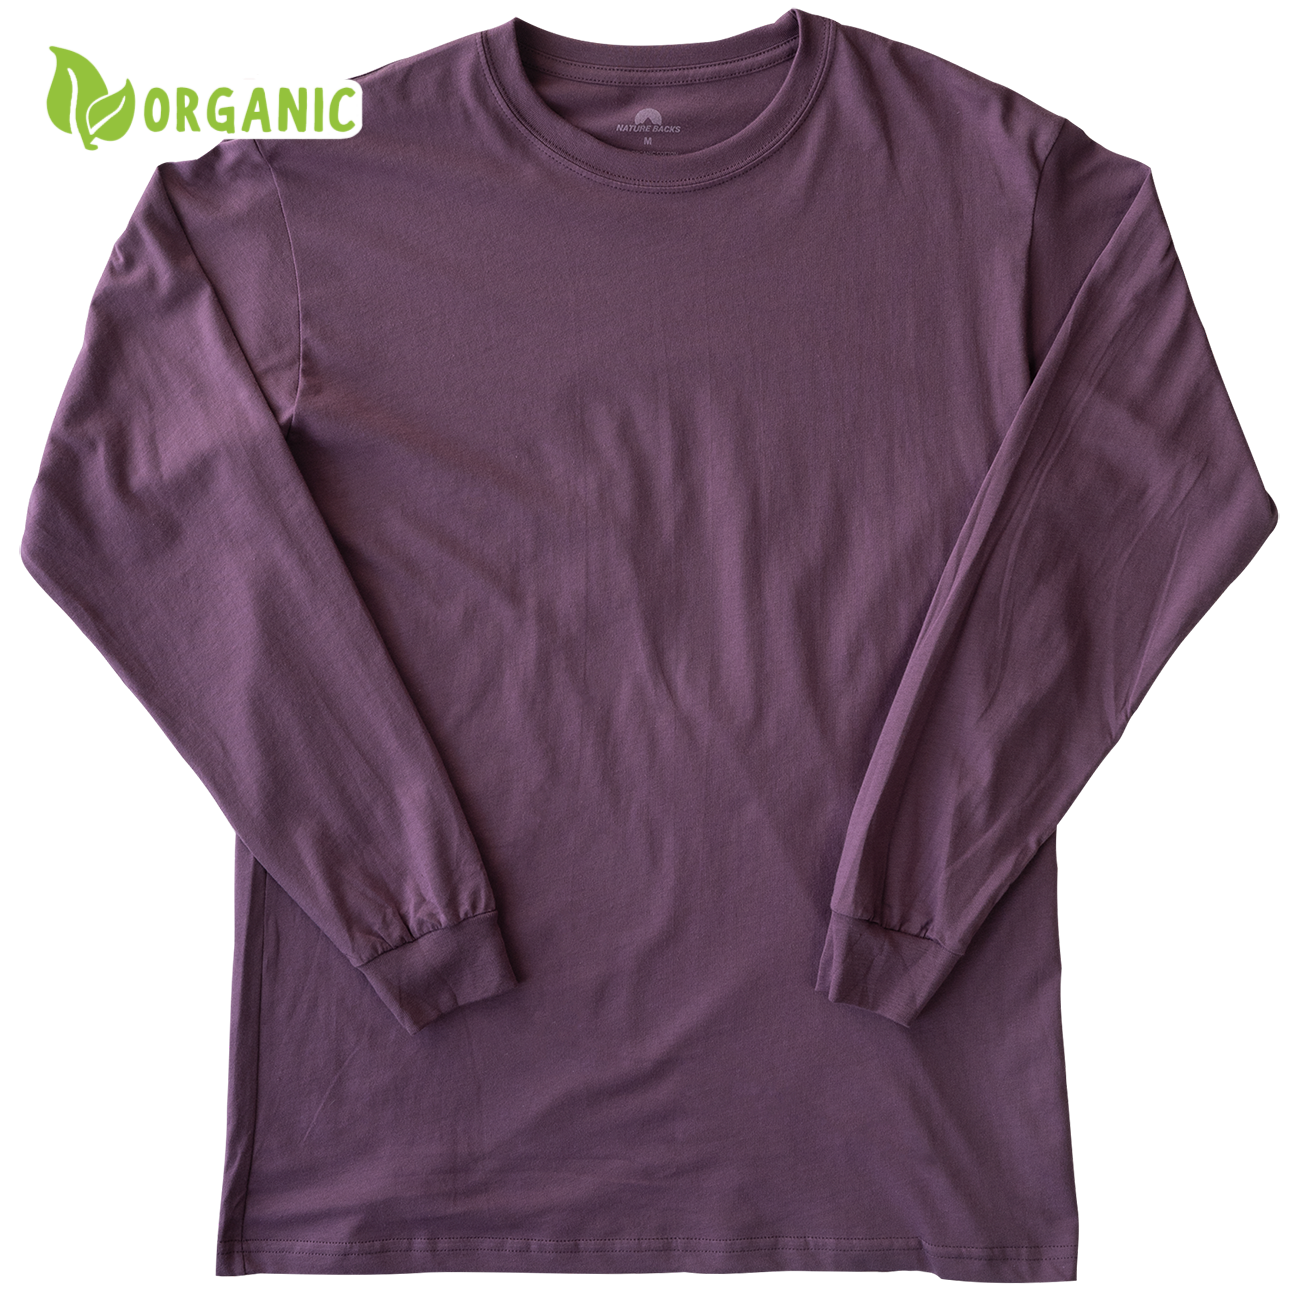 Nature Backs Long Sleeve 100% Organic Cotton T-Shirt | Minimalist Berry Long Sleeve made with Eco-Friendly Fibers Sustainably made in the USA 